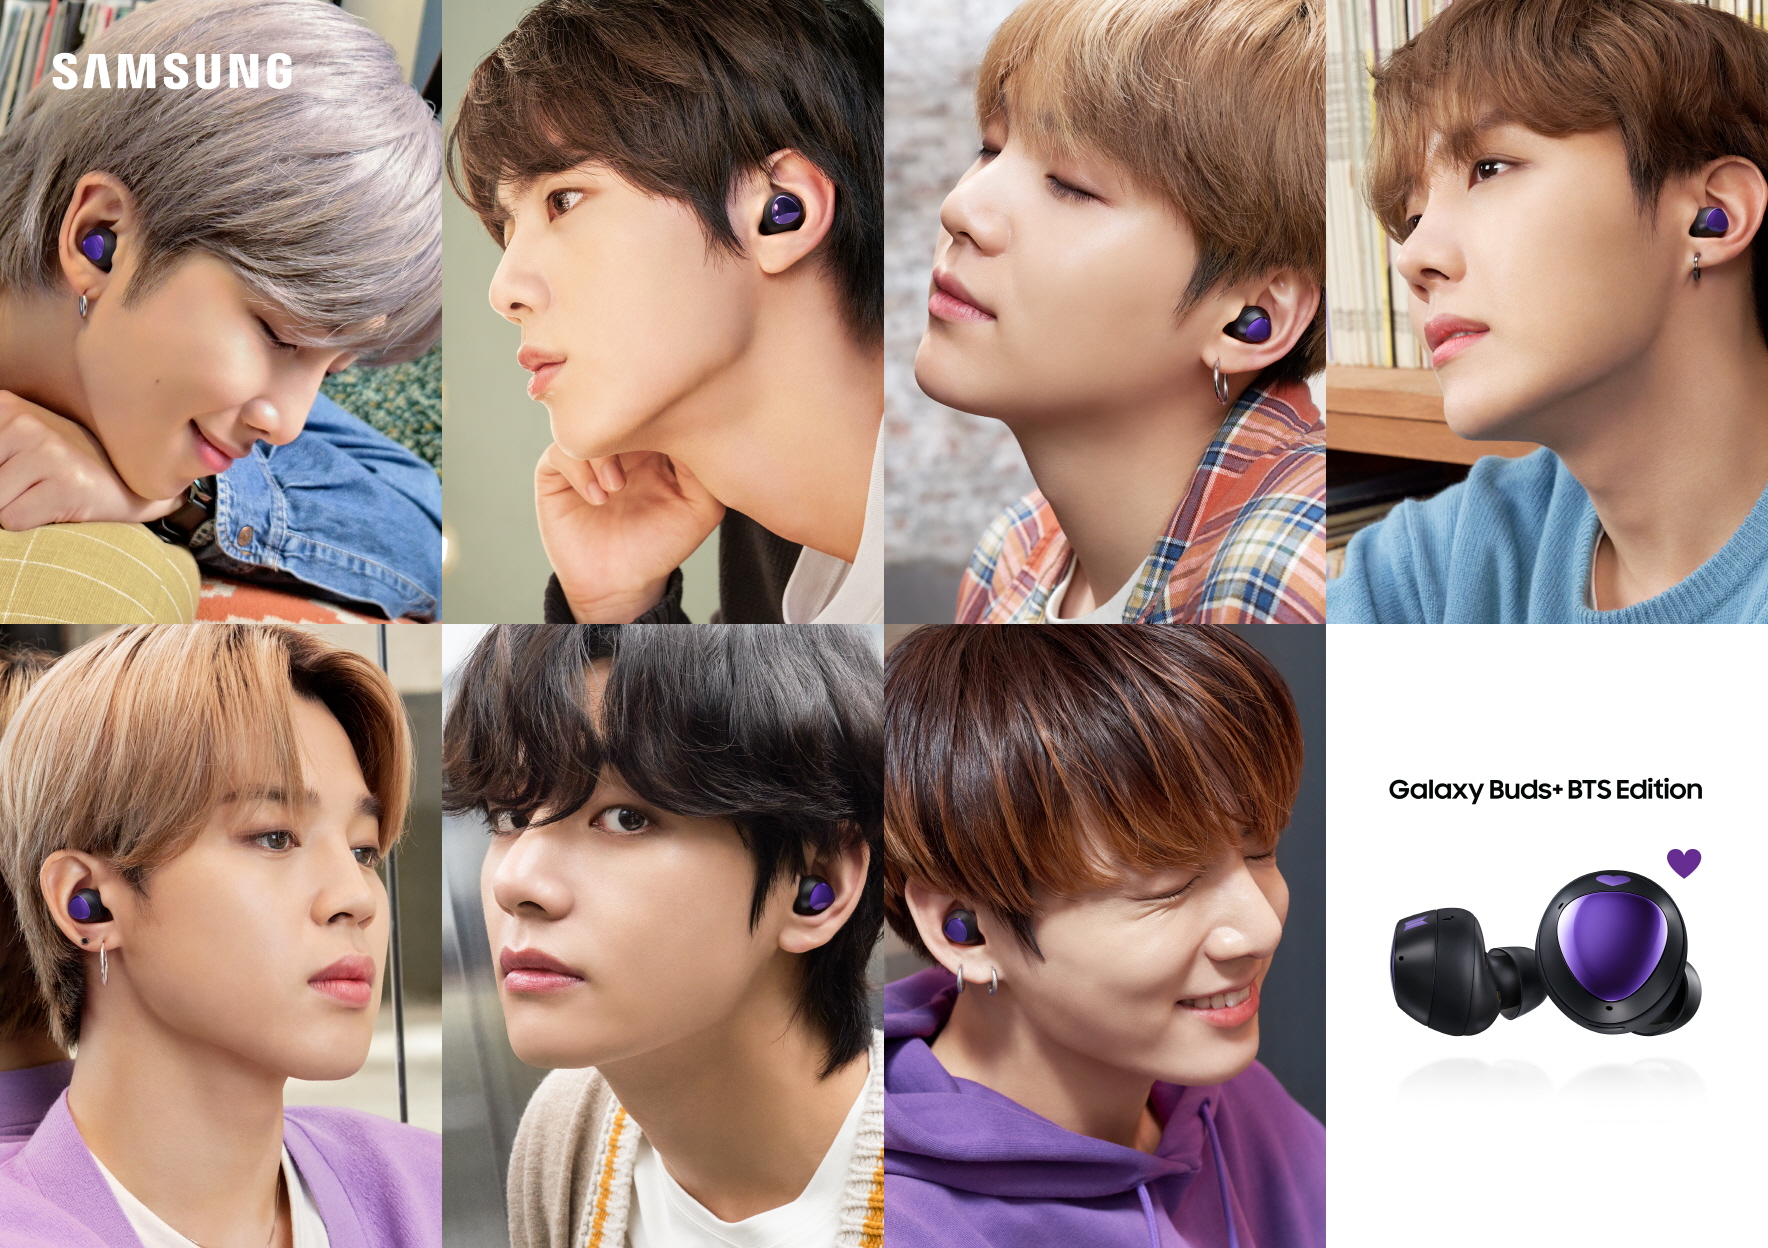 Samsung unveils BTS-themed Galaxy S20+ and Galaxy Buds+